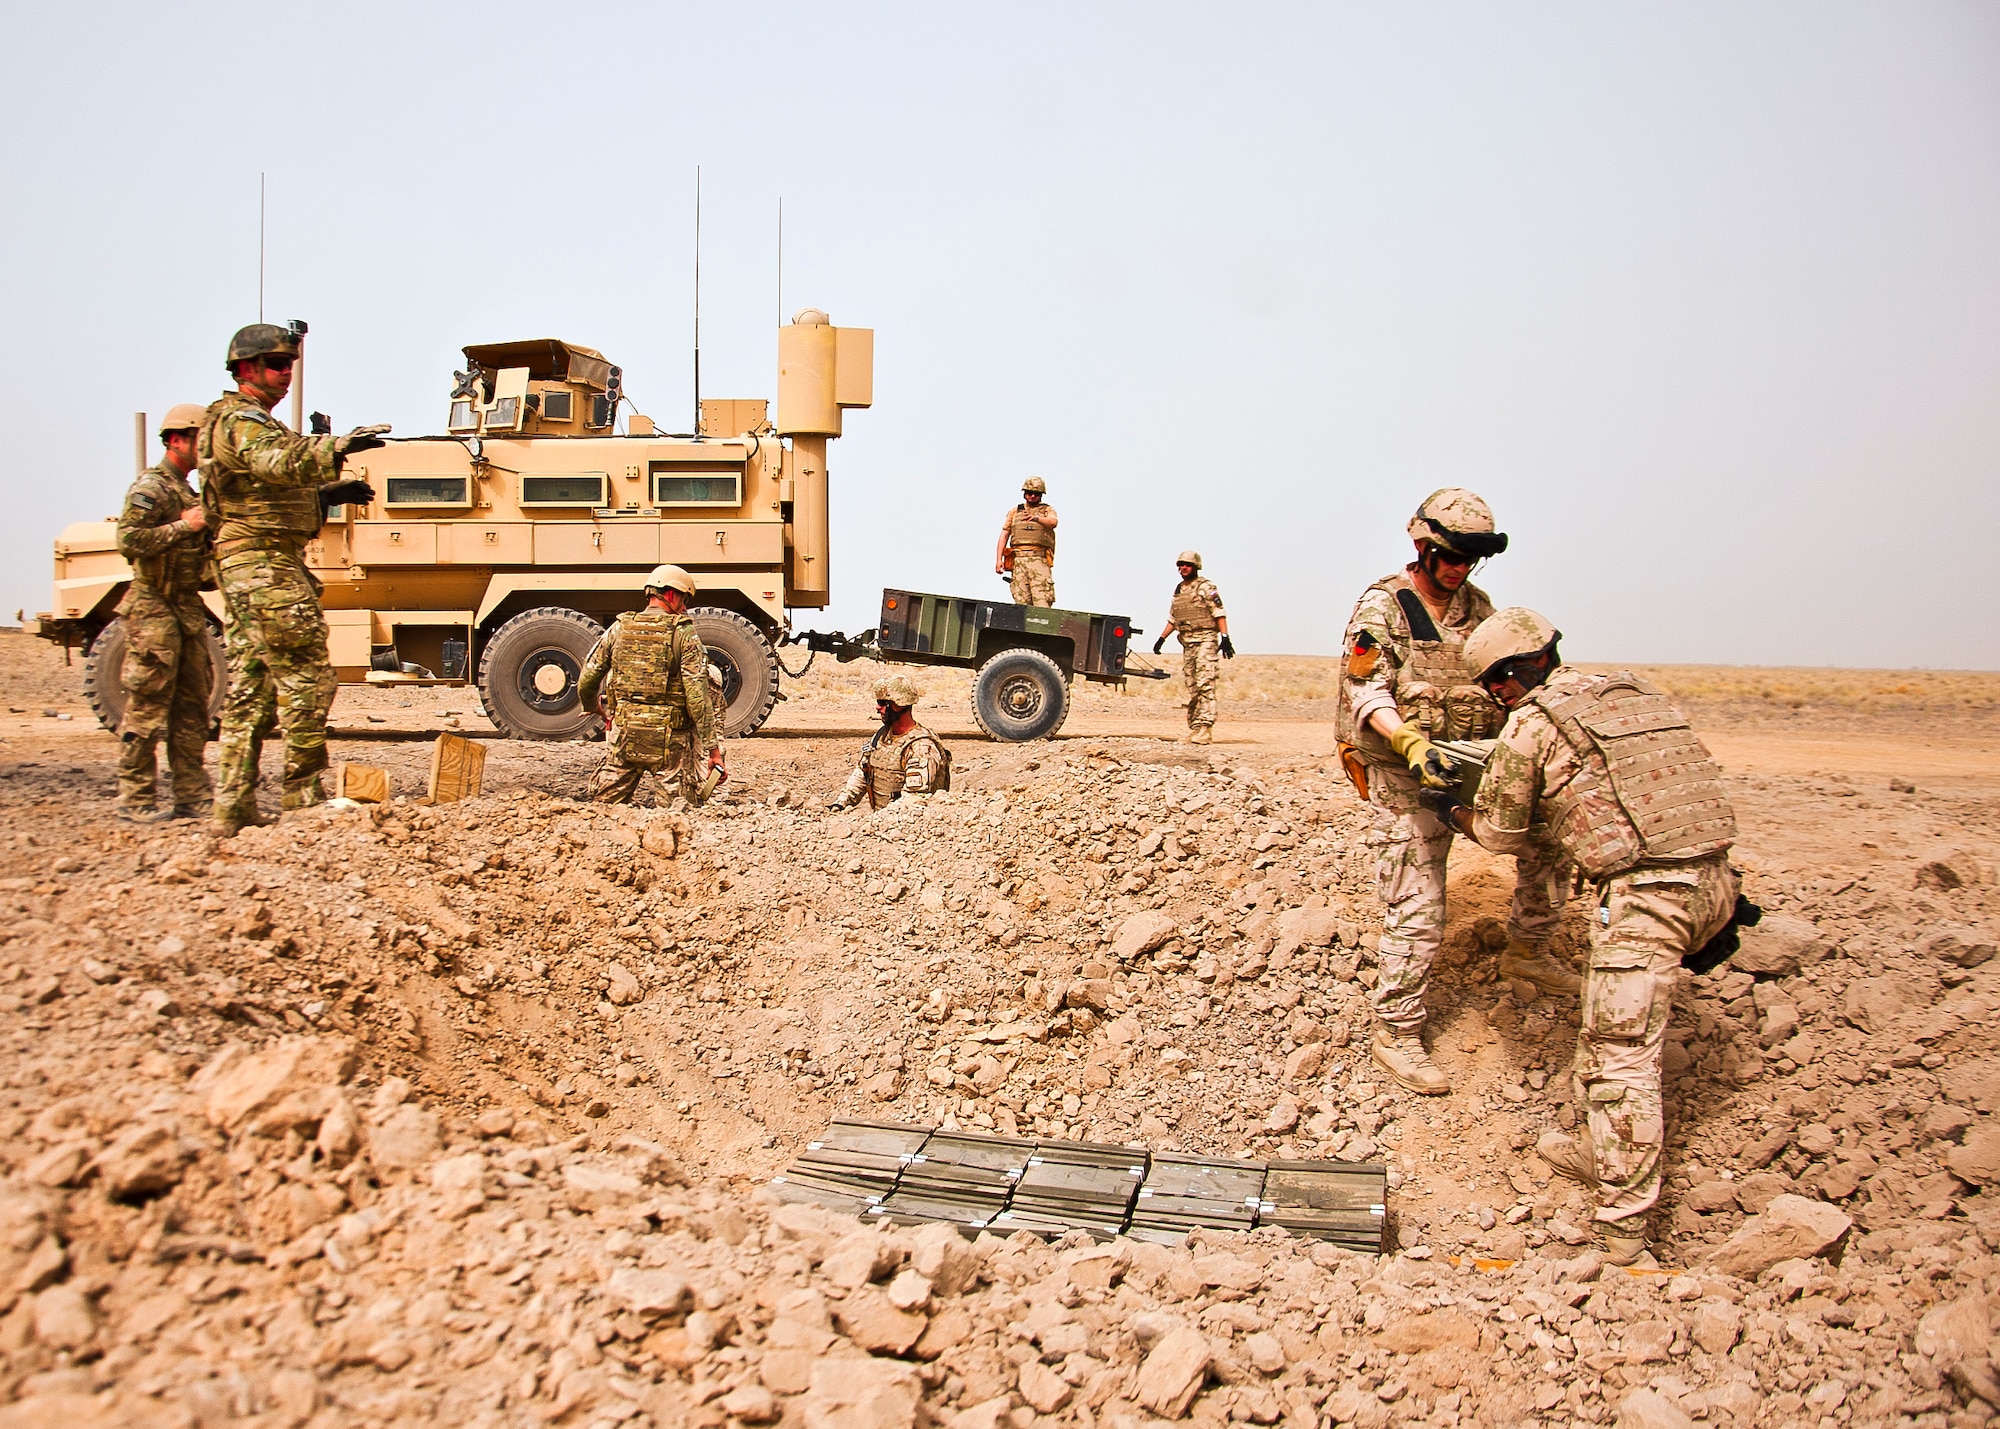 U.S. Air Force and Slovakian explosive ordnance disposal personnel unload a trailer and carefully place ordnance for a controlled detonation near Kandahar Airfield, Afghanistan, June 12, 2013. U.S. Air Force, U.S. Army, Slovakian and Australian EOD personnel participated in a joint mission to dispose of excess military ordnance. (U.S. Air Force photo/Senior Airman Scott Saldukas)